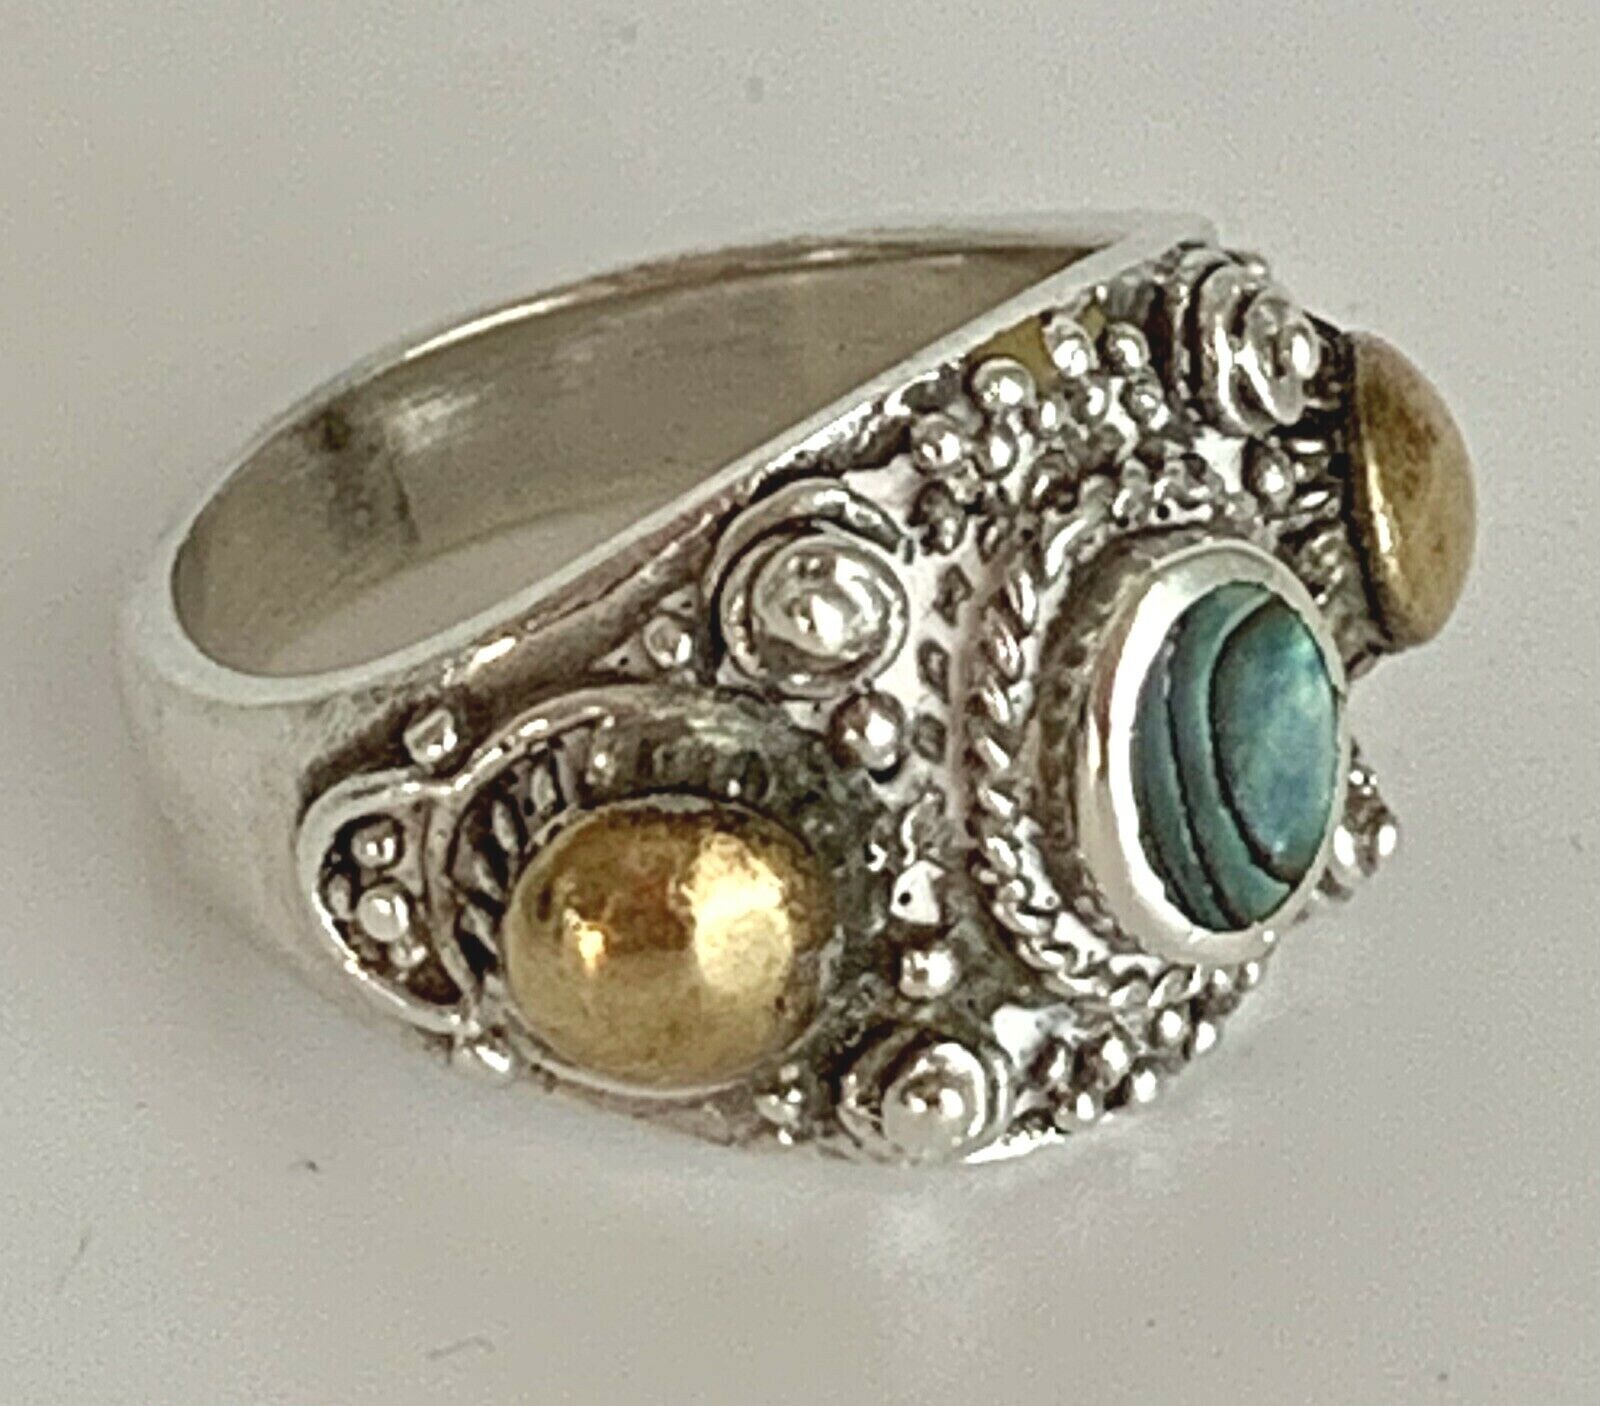 Vintage Abalone Mother of Pearl Delicate Filigree Ranking TOP2 Ring Handmade Max 48% OFF